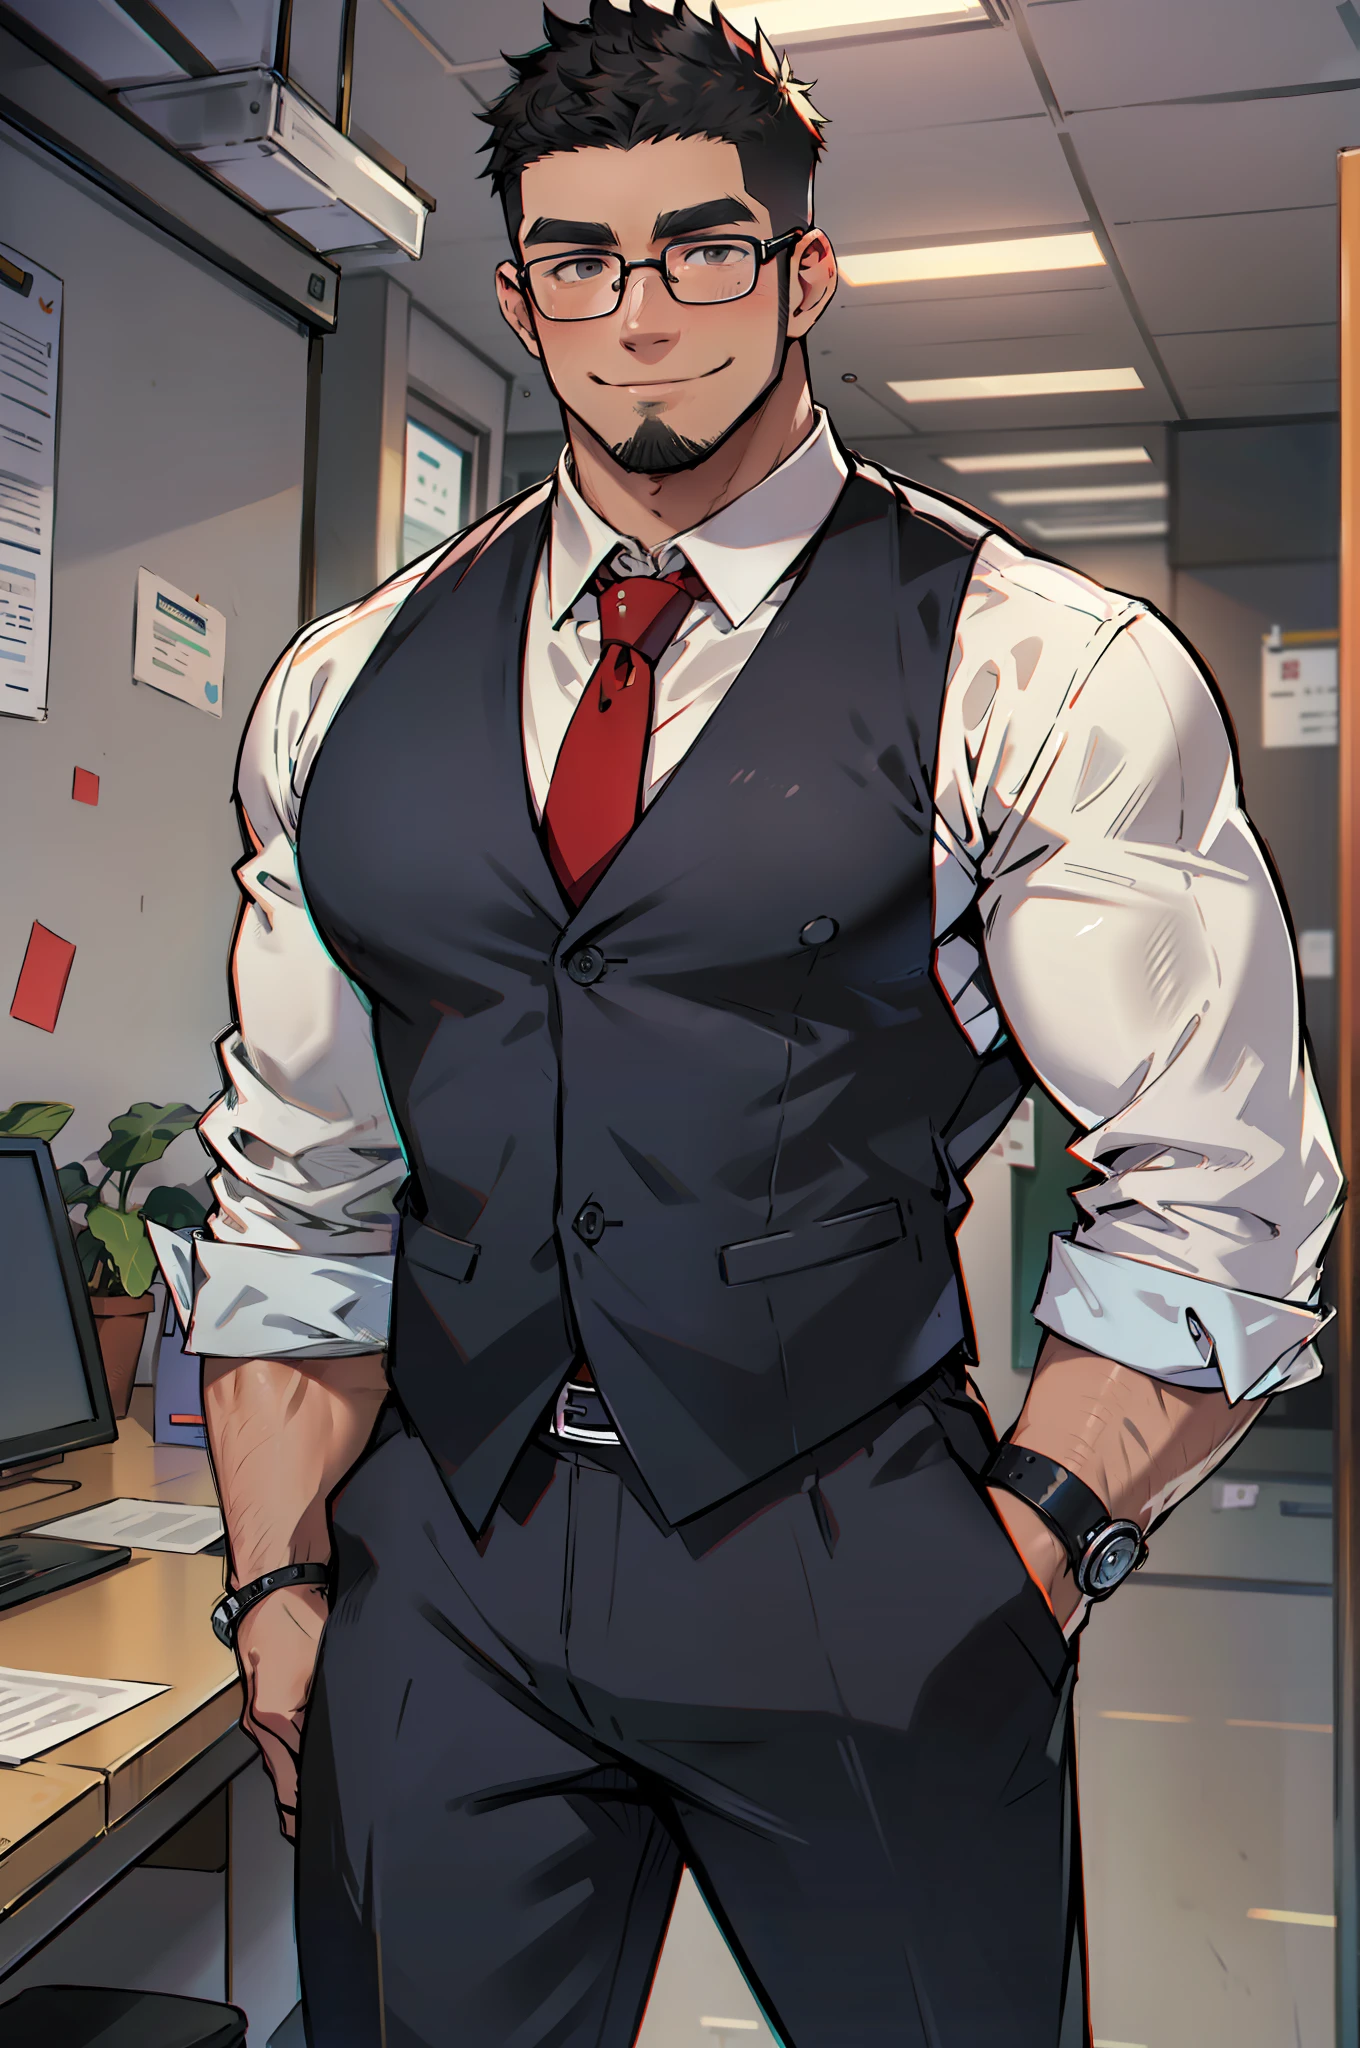 4k, masterpiece, high resolution:1.2, 1 man, 42 year old, solo, bara, muscular!!!, really tall, big physique (beast), crew cut hair, facial hair, black hair, cute smile, friendly, standing in an office, wearing formal trousers, wearing plain formal office shirt, wearing red tie, tidy outfits, wearing glasses, upstairs office in the background, ultra detailed, flat style, ((no